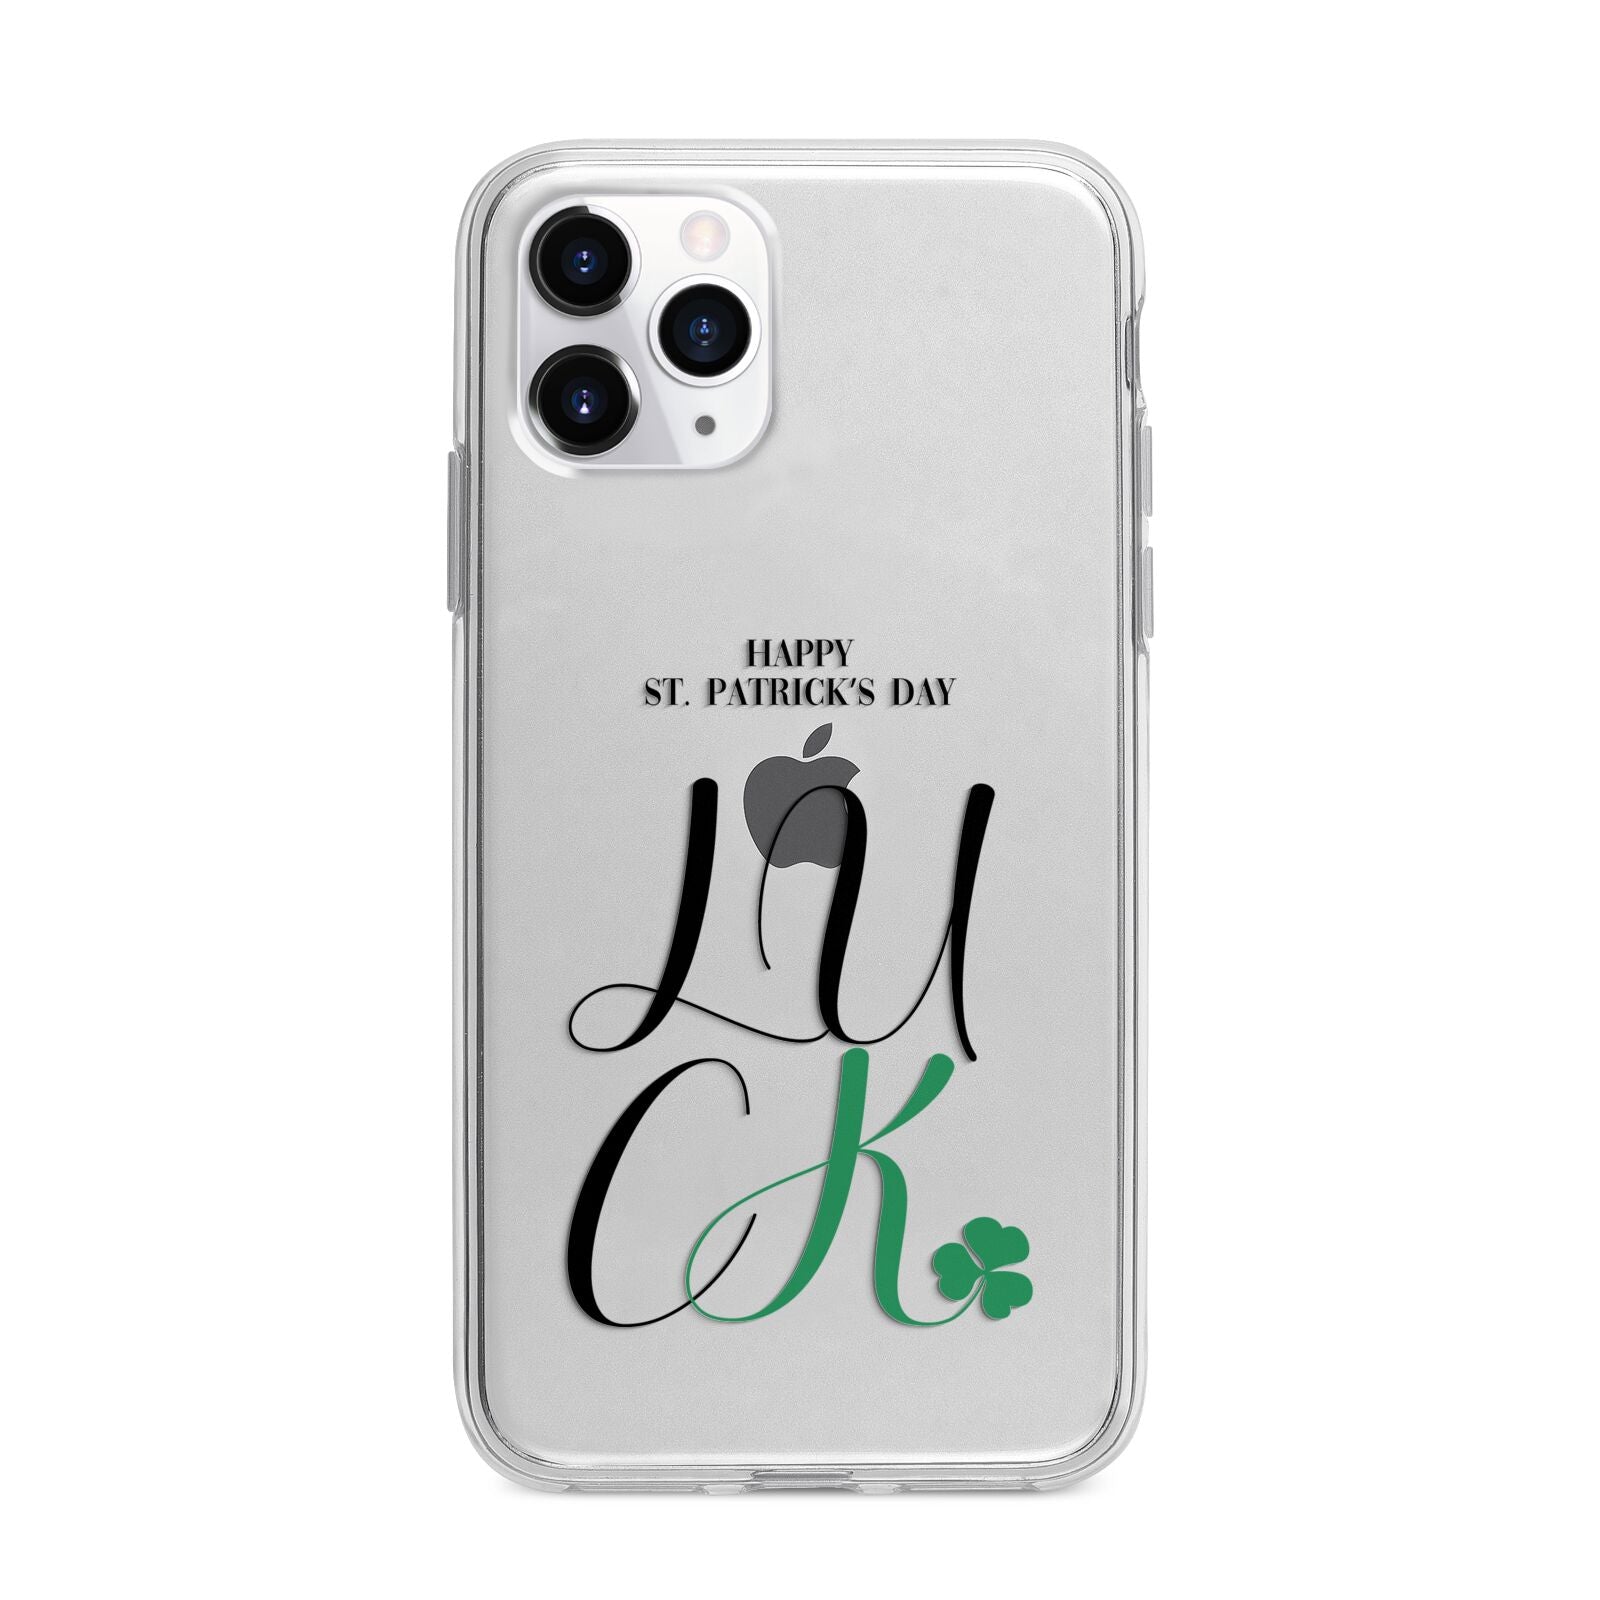 Happy St Patricks Day Luck Apple iPhone 11 Pro Max in Silver with Bumper Case